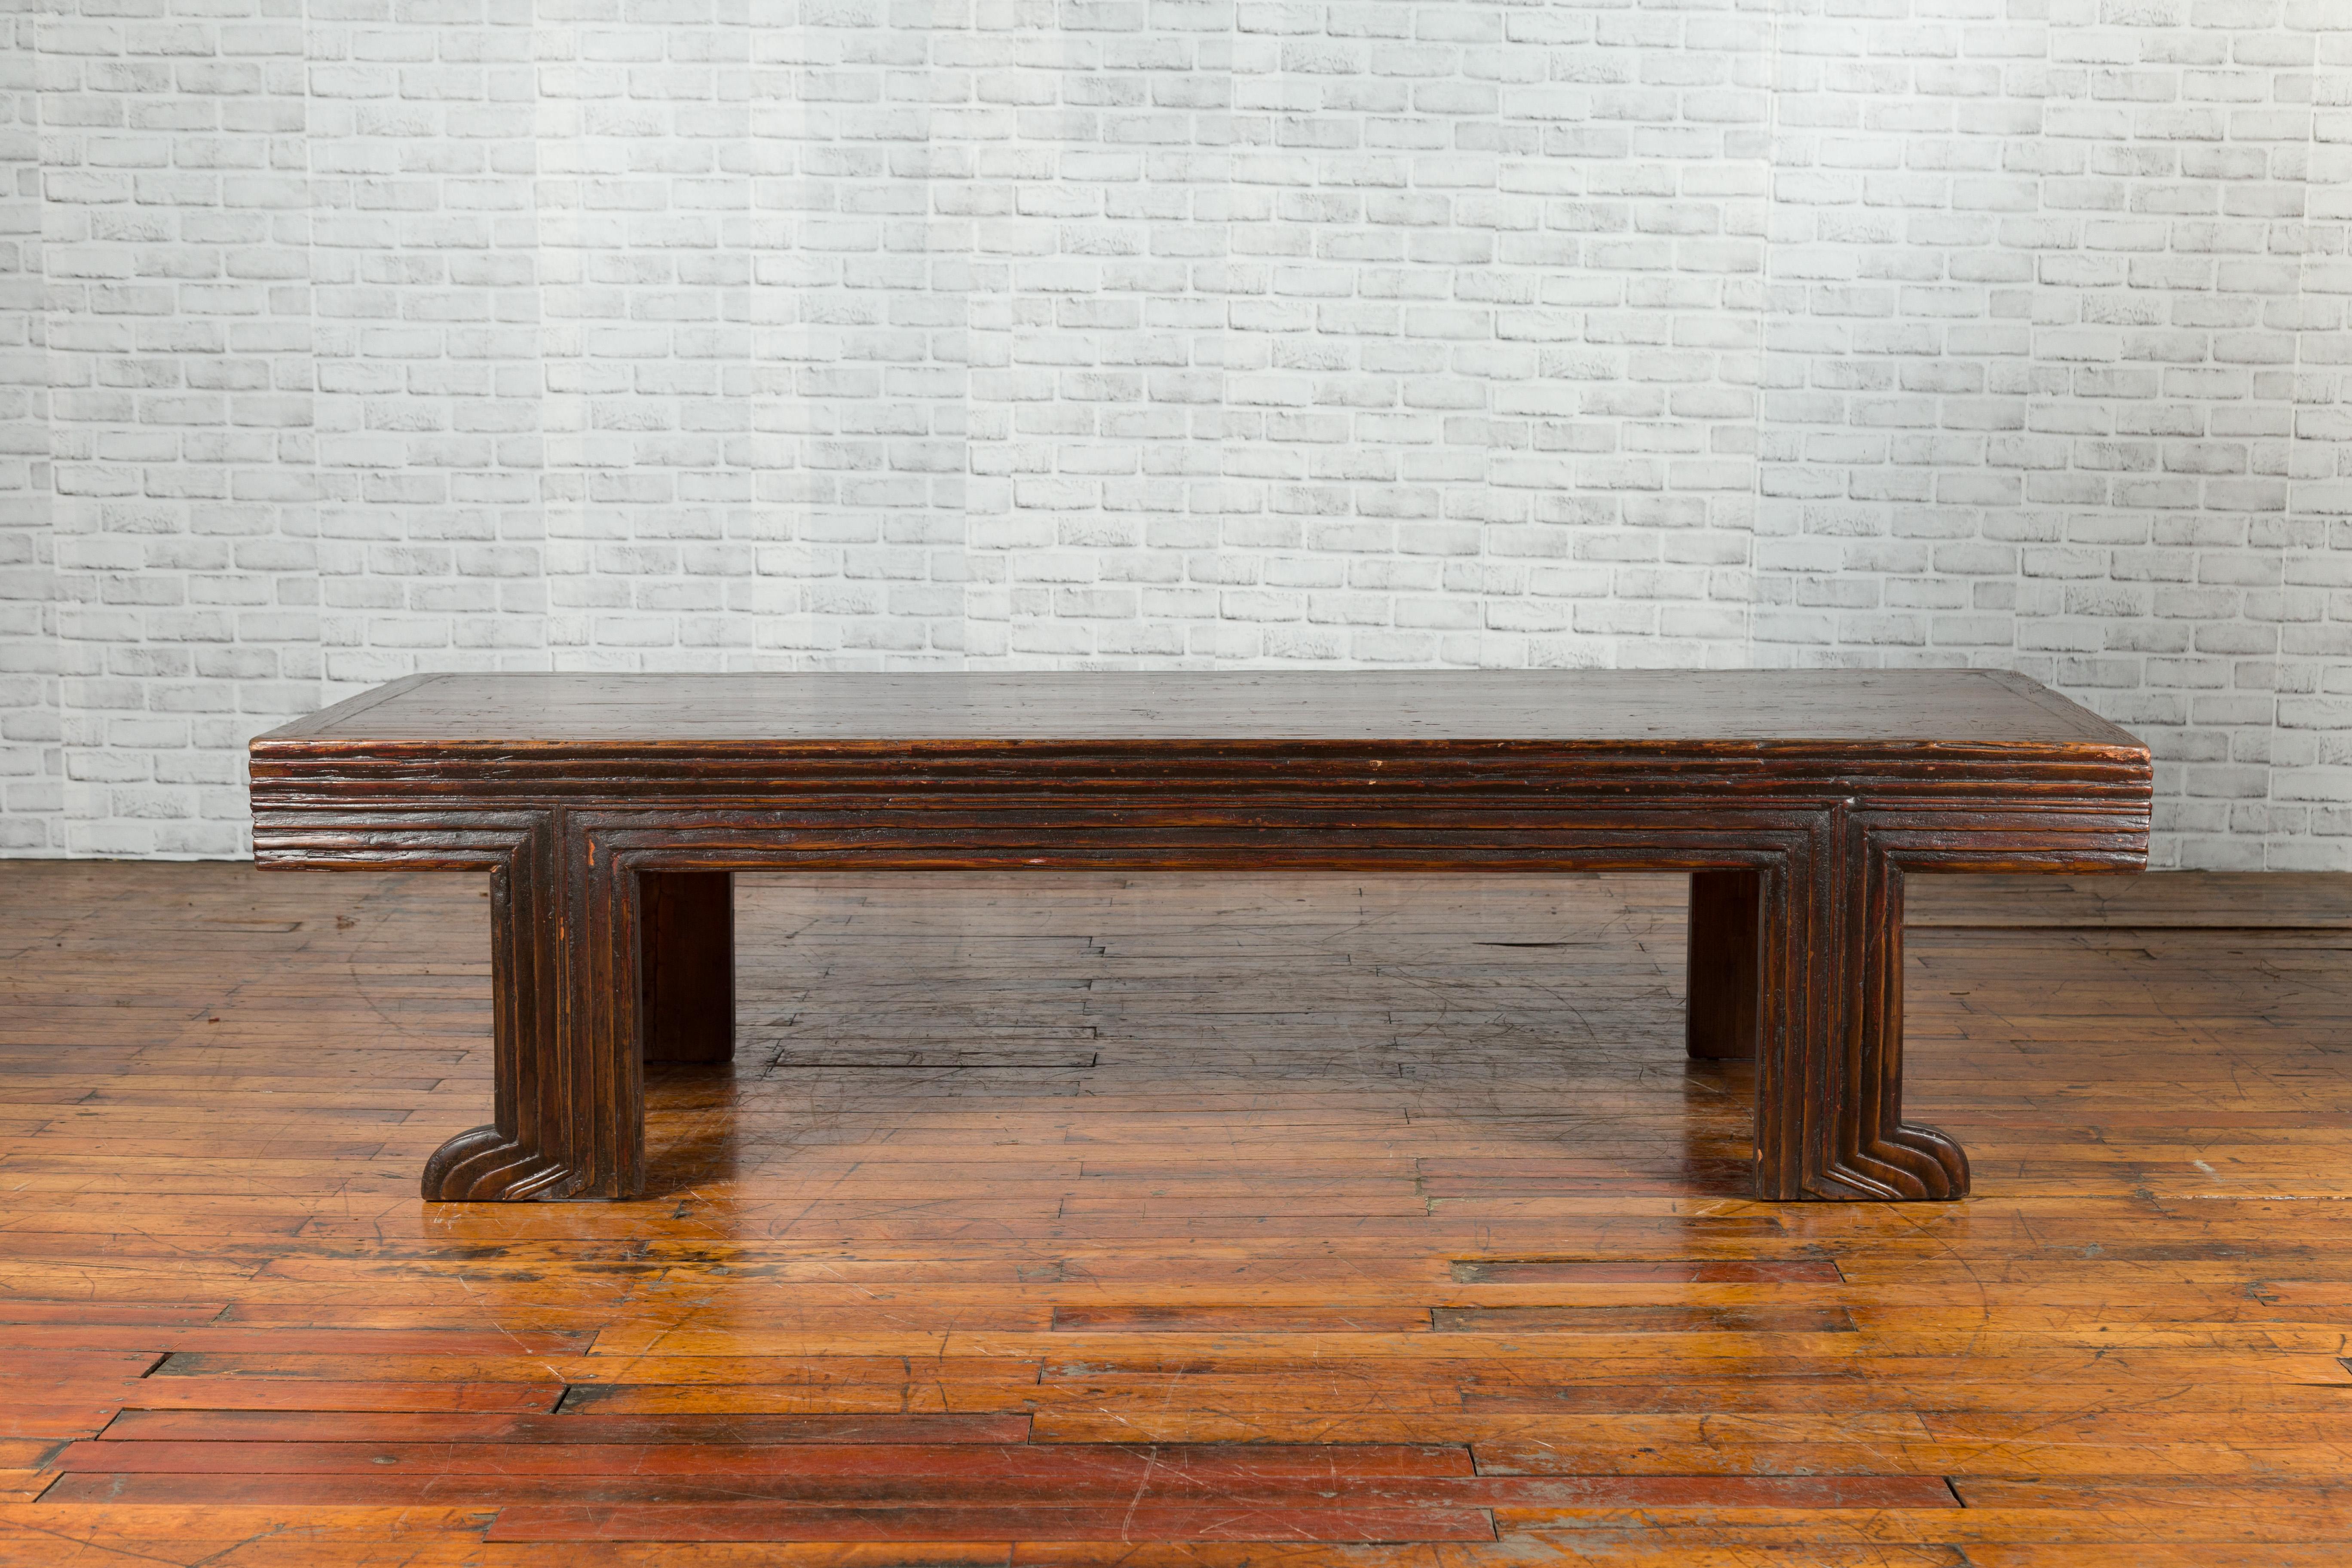 Chinese Qing Dynasty 19th Century Elm Coffee Table with Unusual Recessed Legs 7